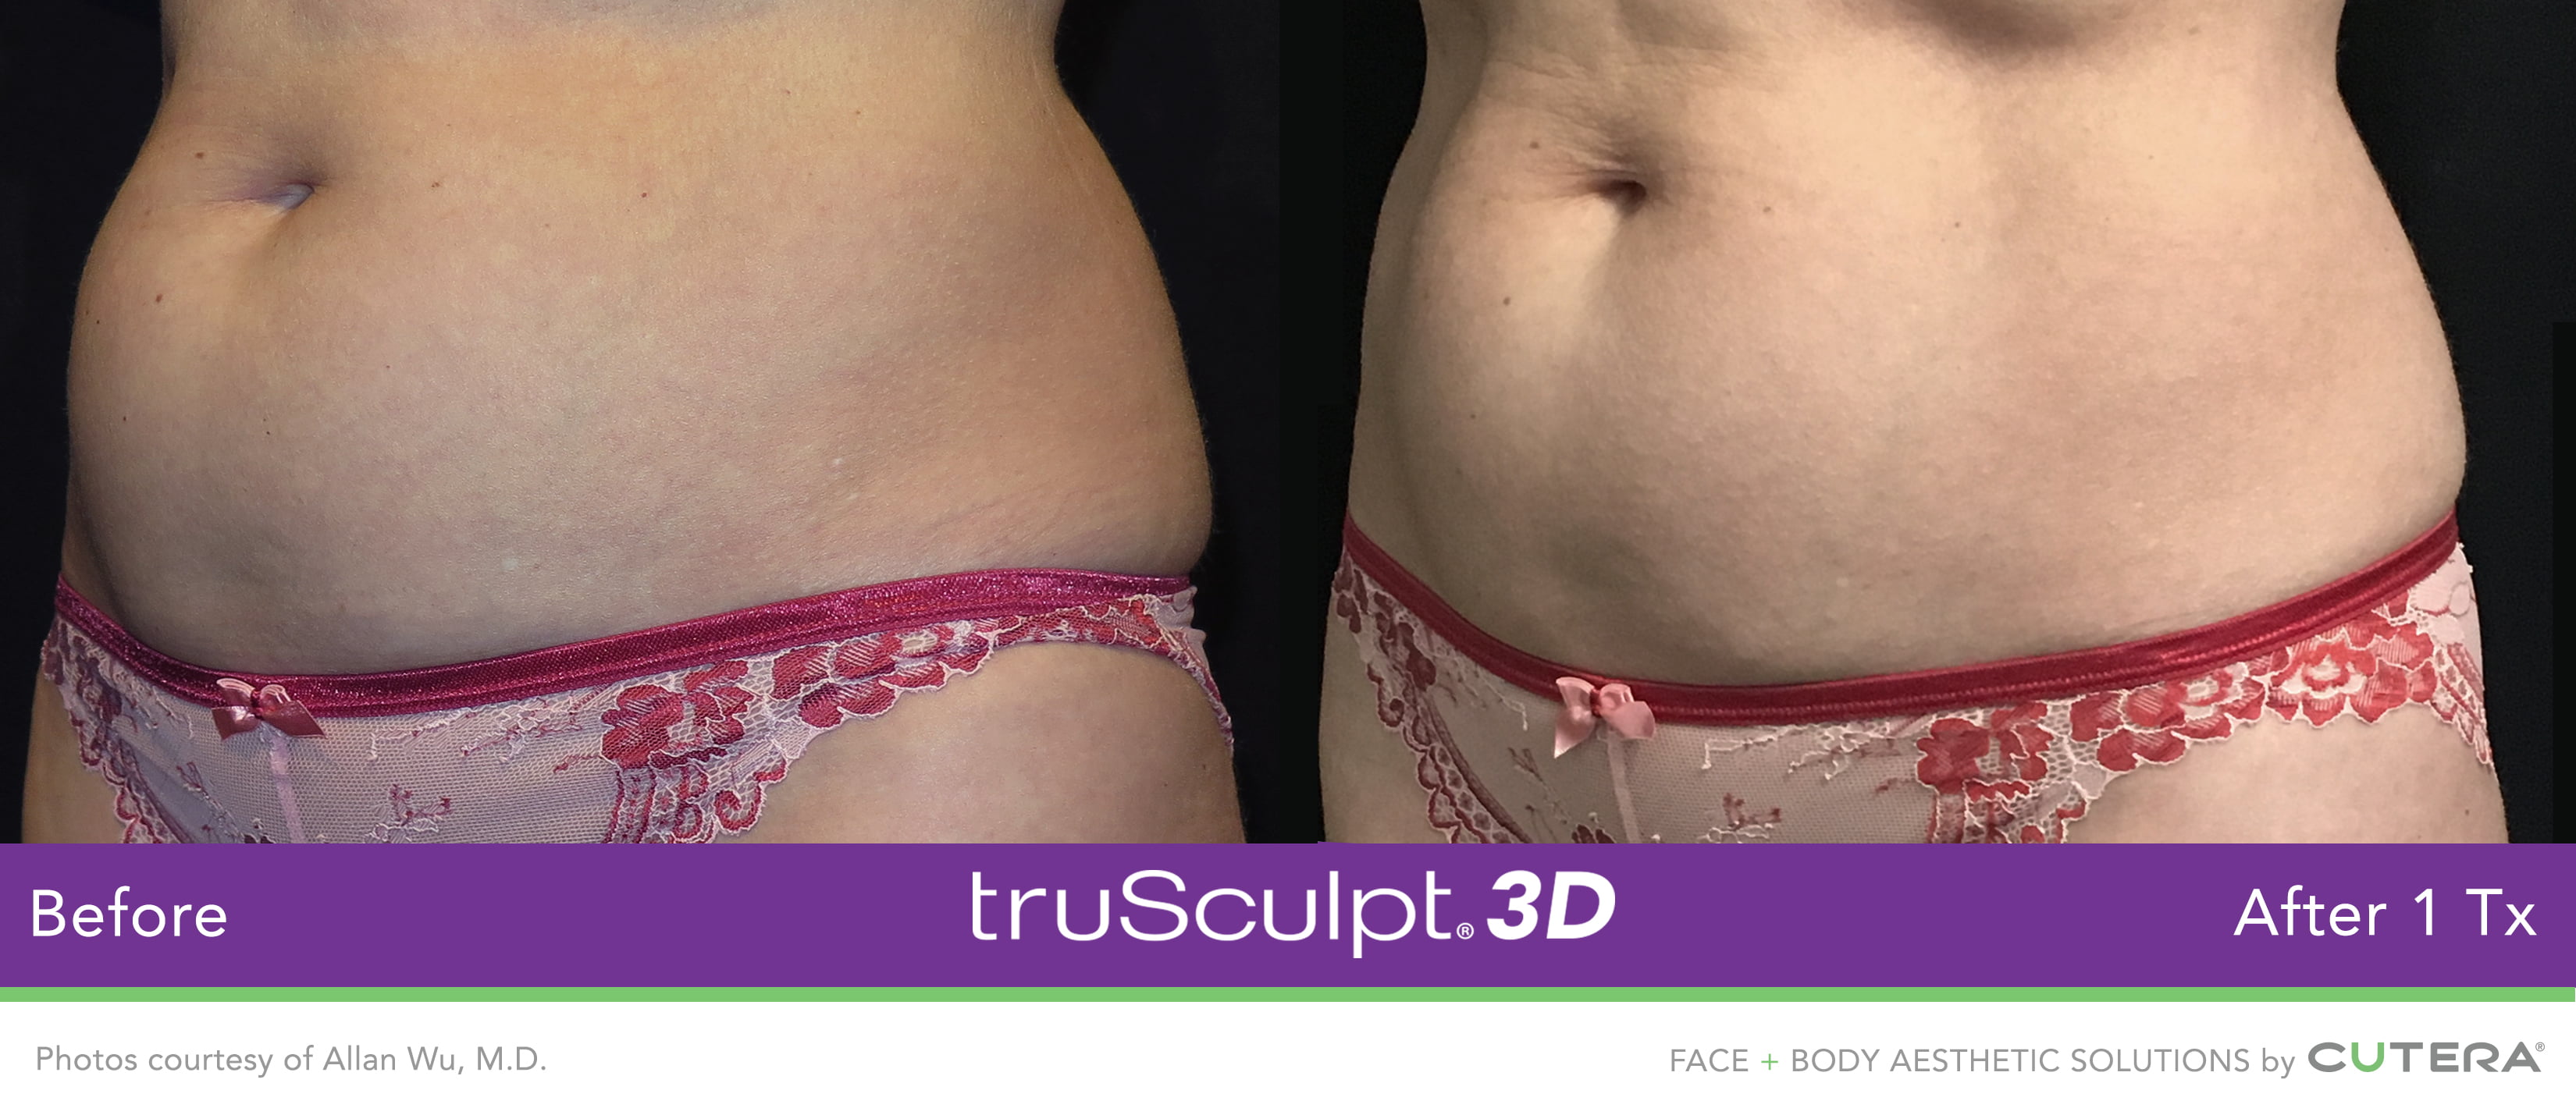 Before and after truSculpt 3D